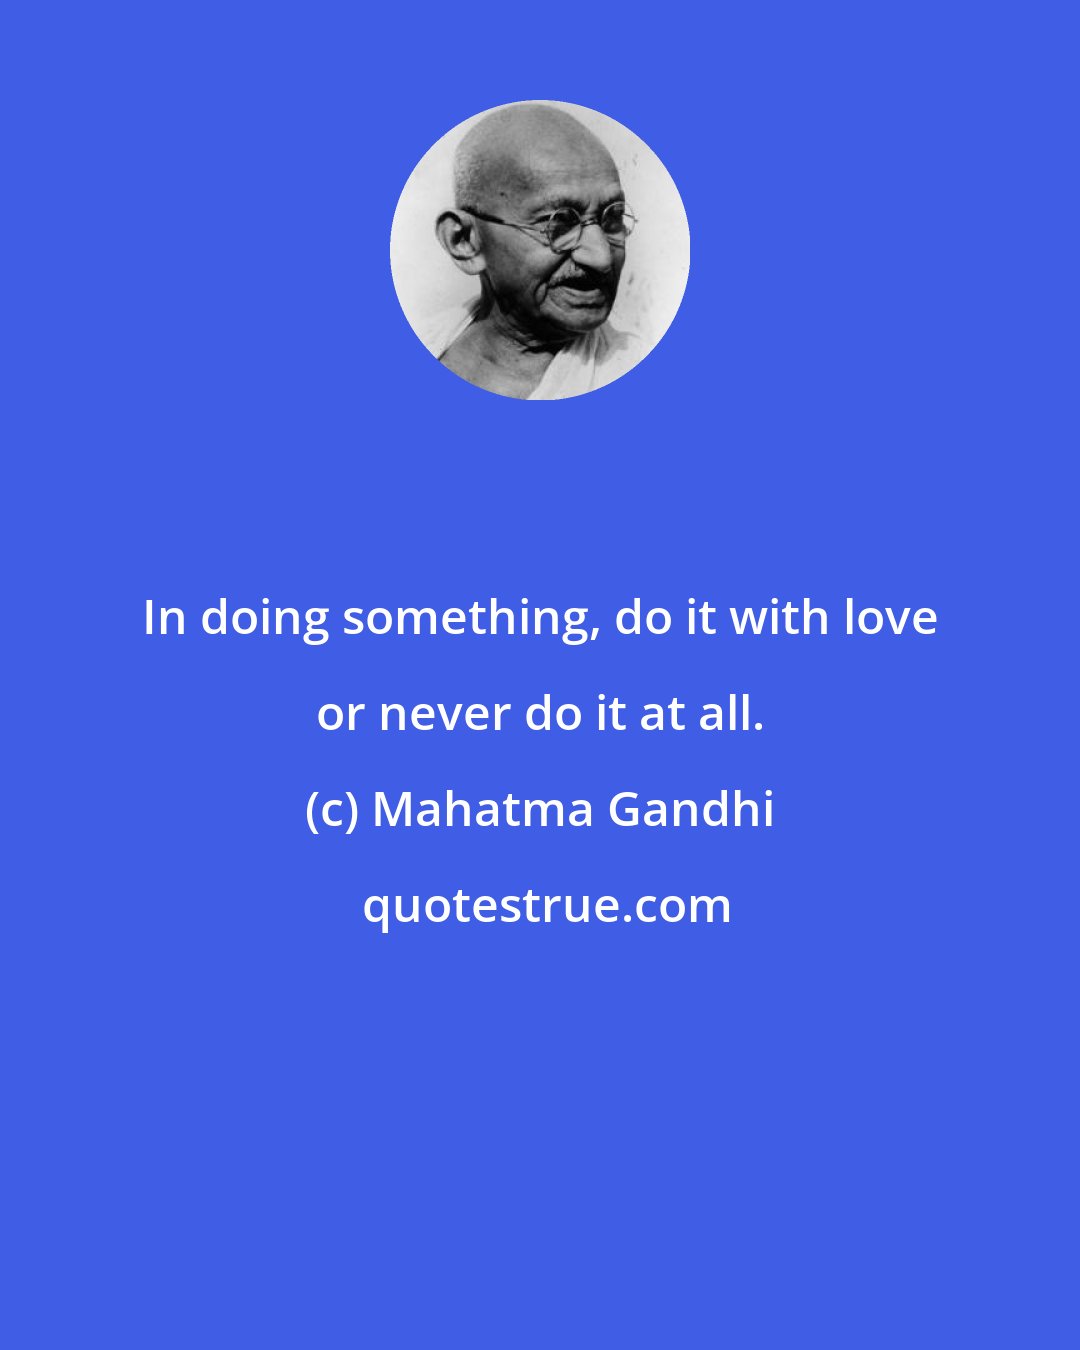 Mahatma Gandhi: In doing something, do it with love or never do it at all.